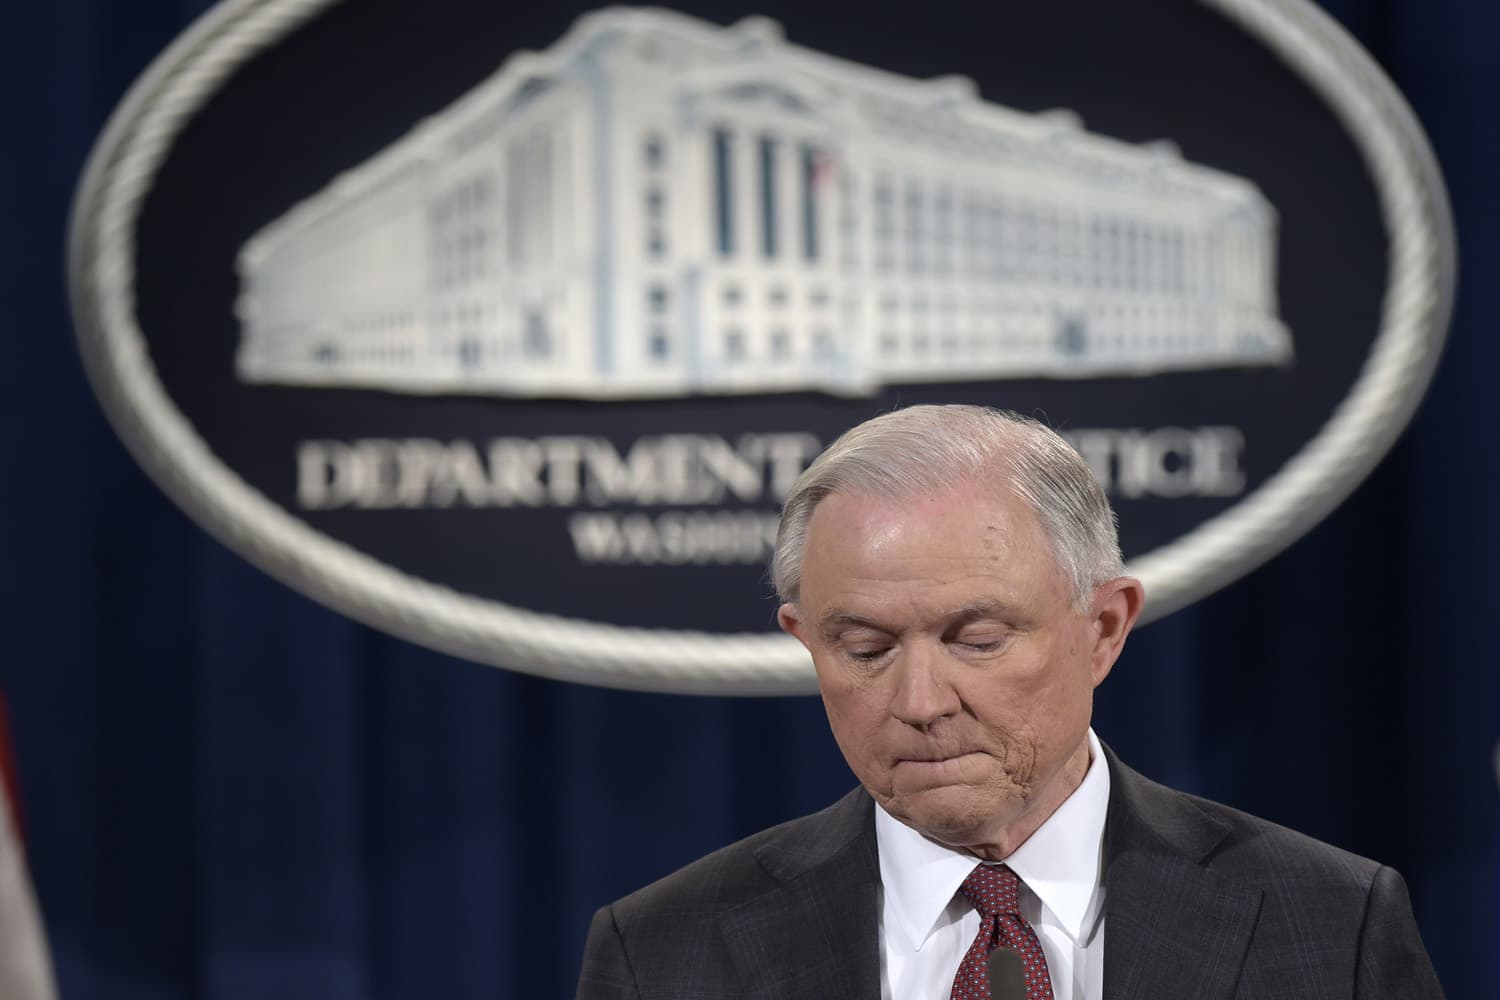 Attorney General Jeff Sessions pauses during a news conference at the Justice Department in Washington. (Susan Walsh/AP)